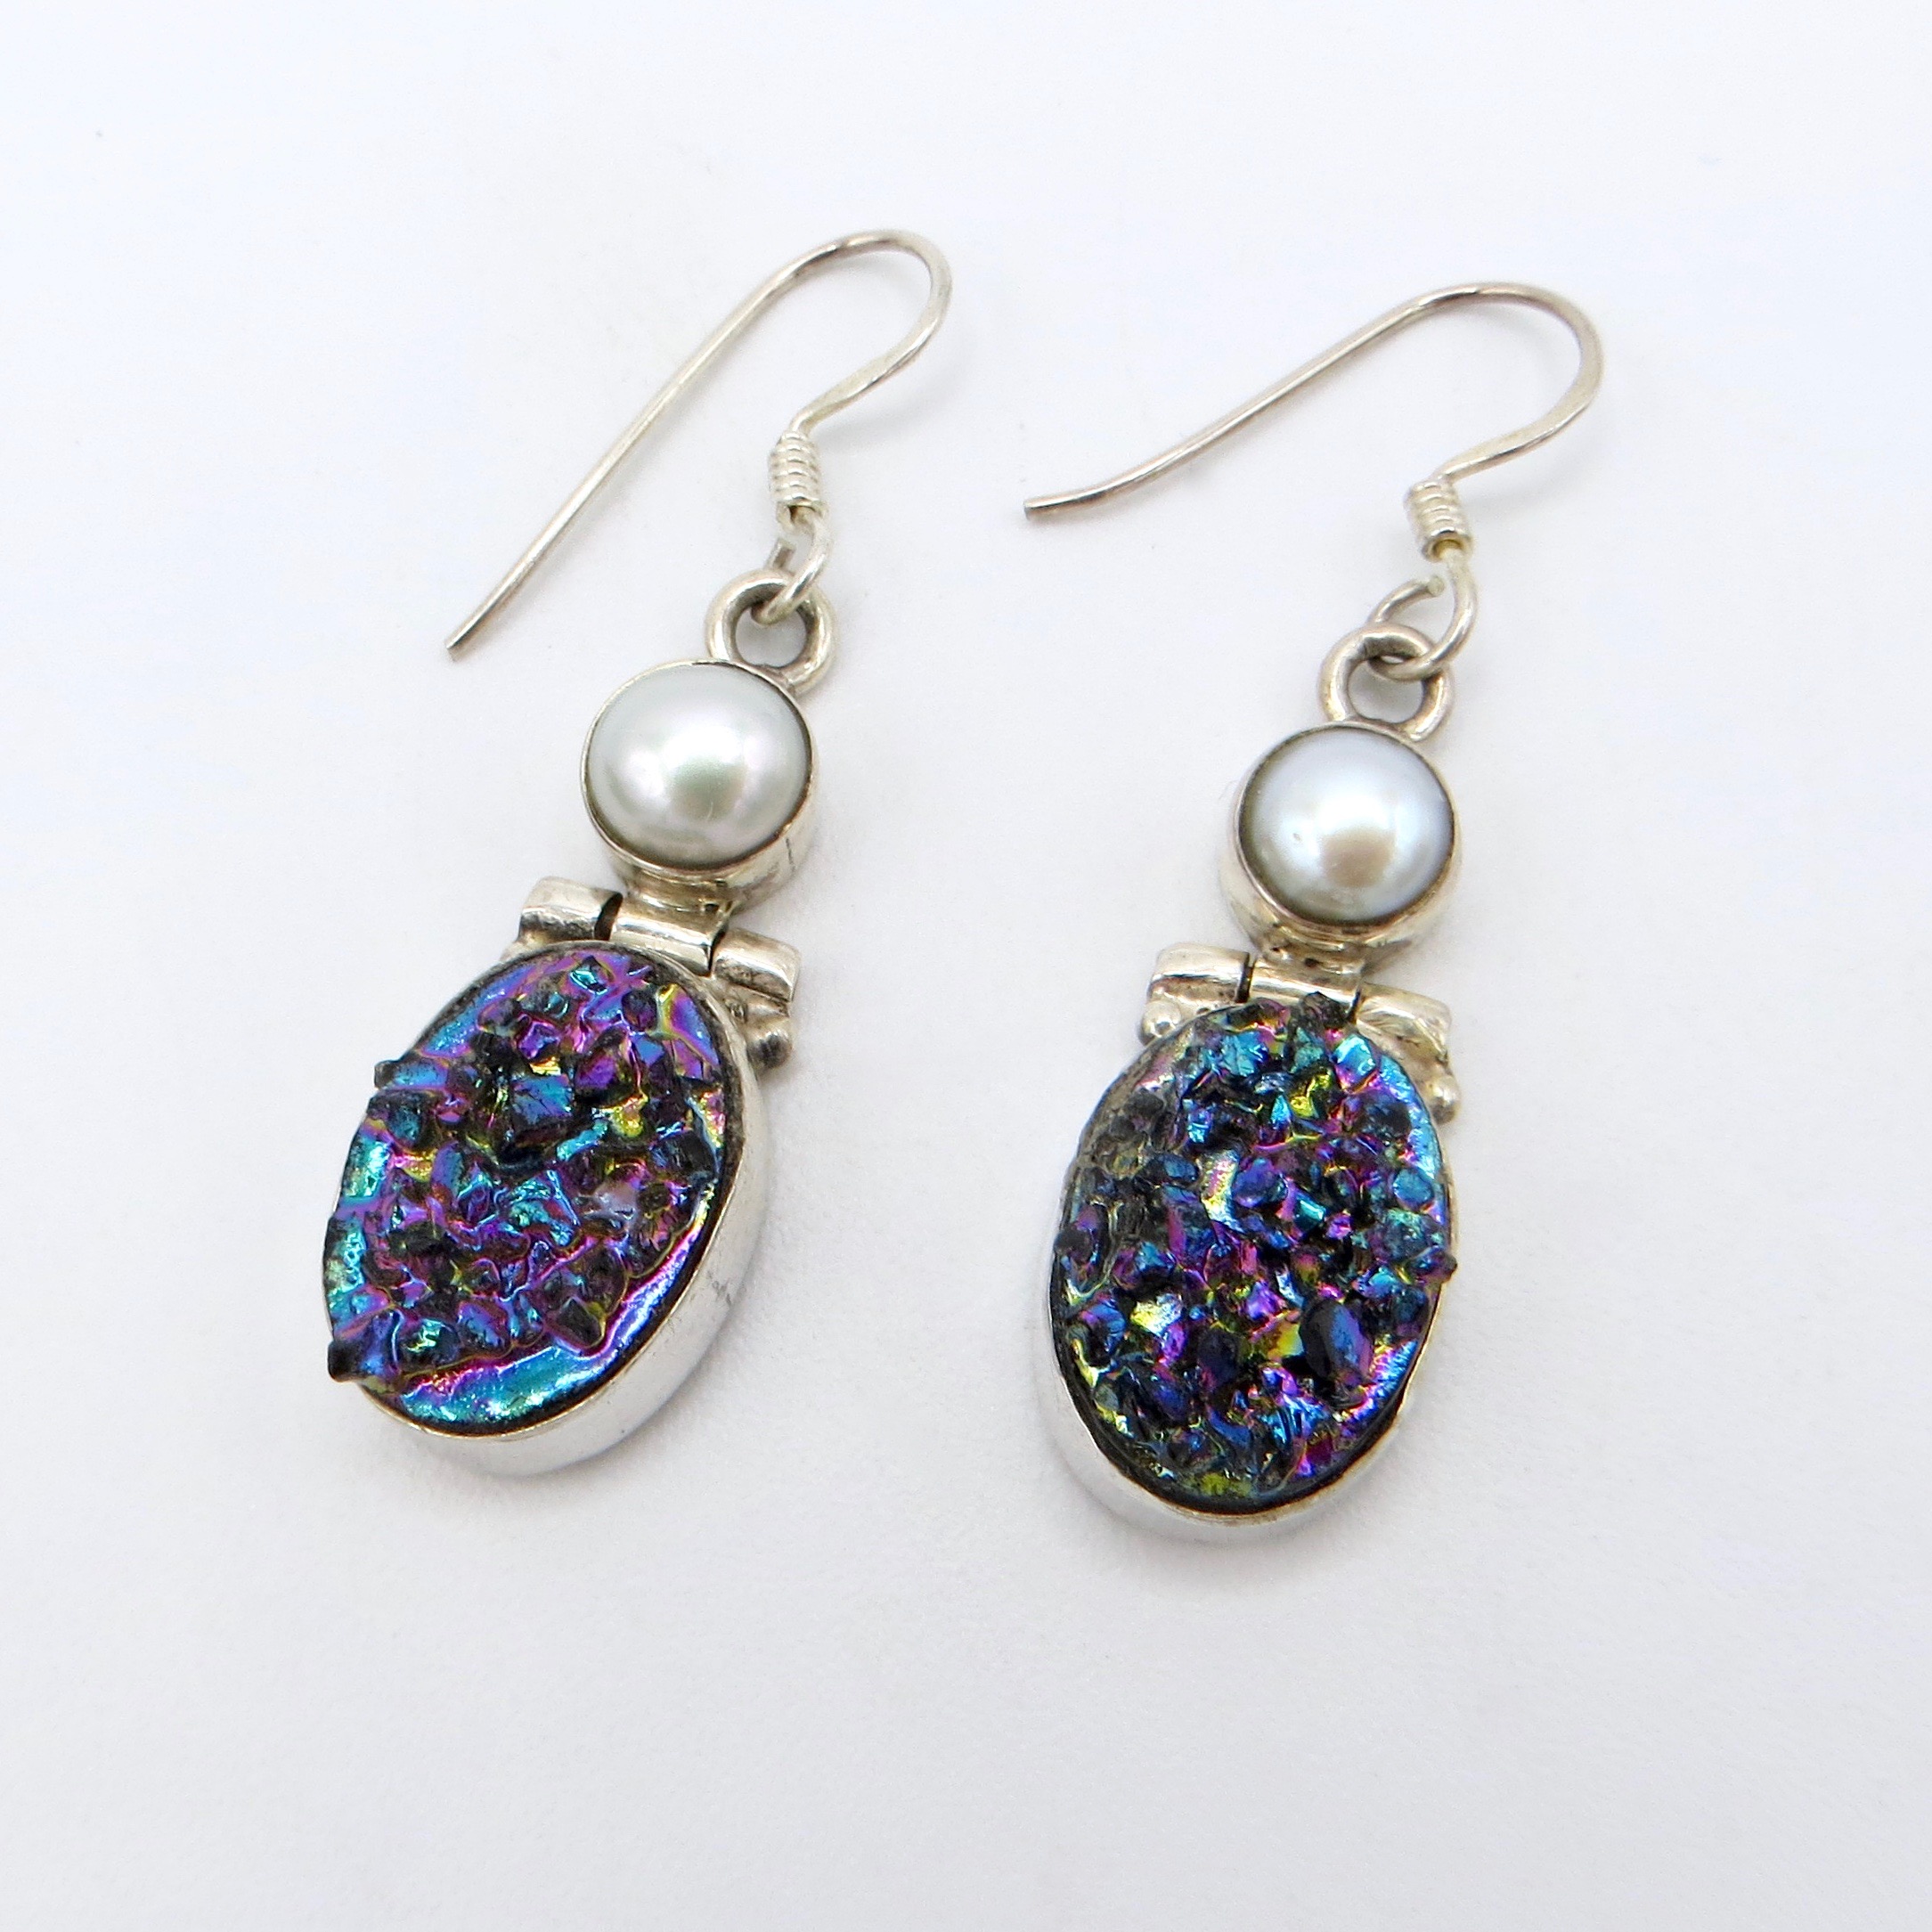 Silver, Pearl and Faux Druzy Earrings